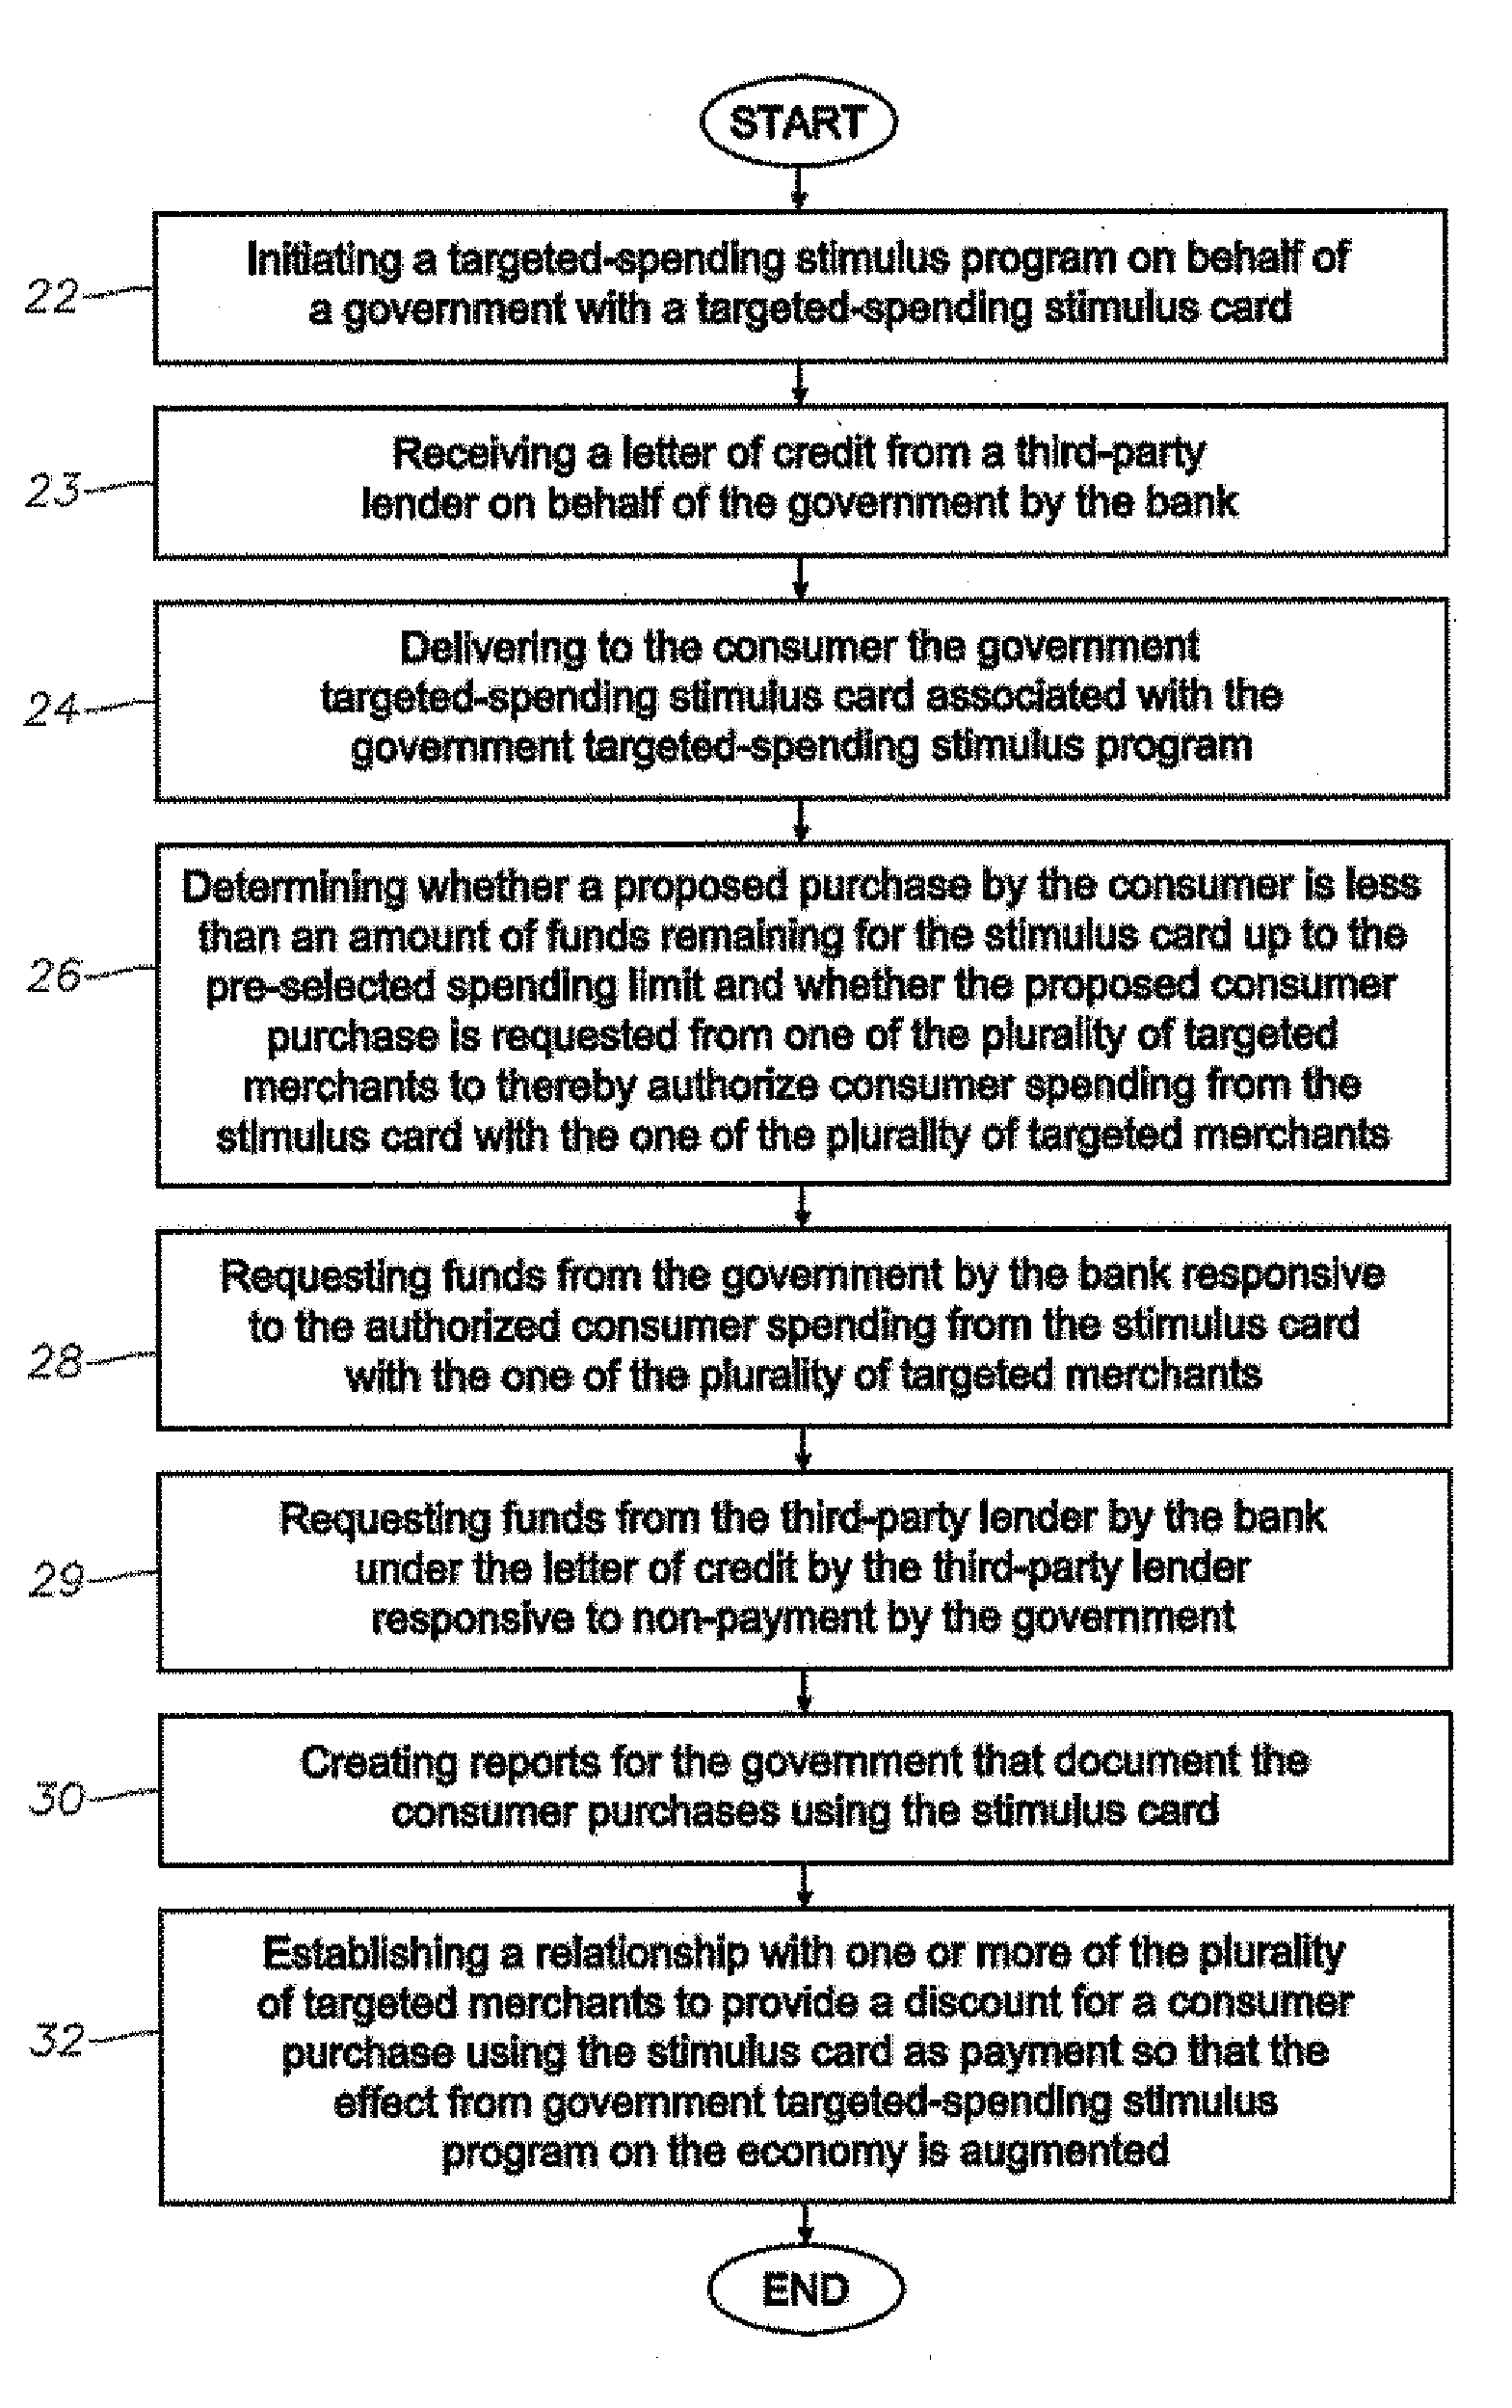 Government Targeted-Spending Stimulus Card System, Program Product, And Computer-Implemented Methods